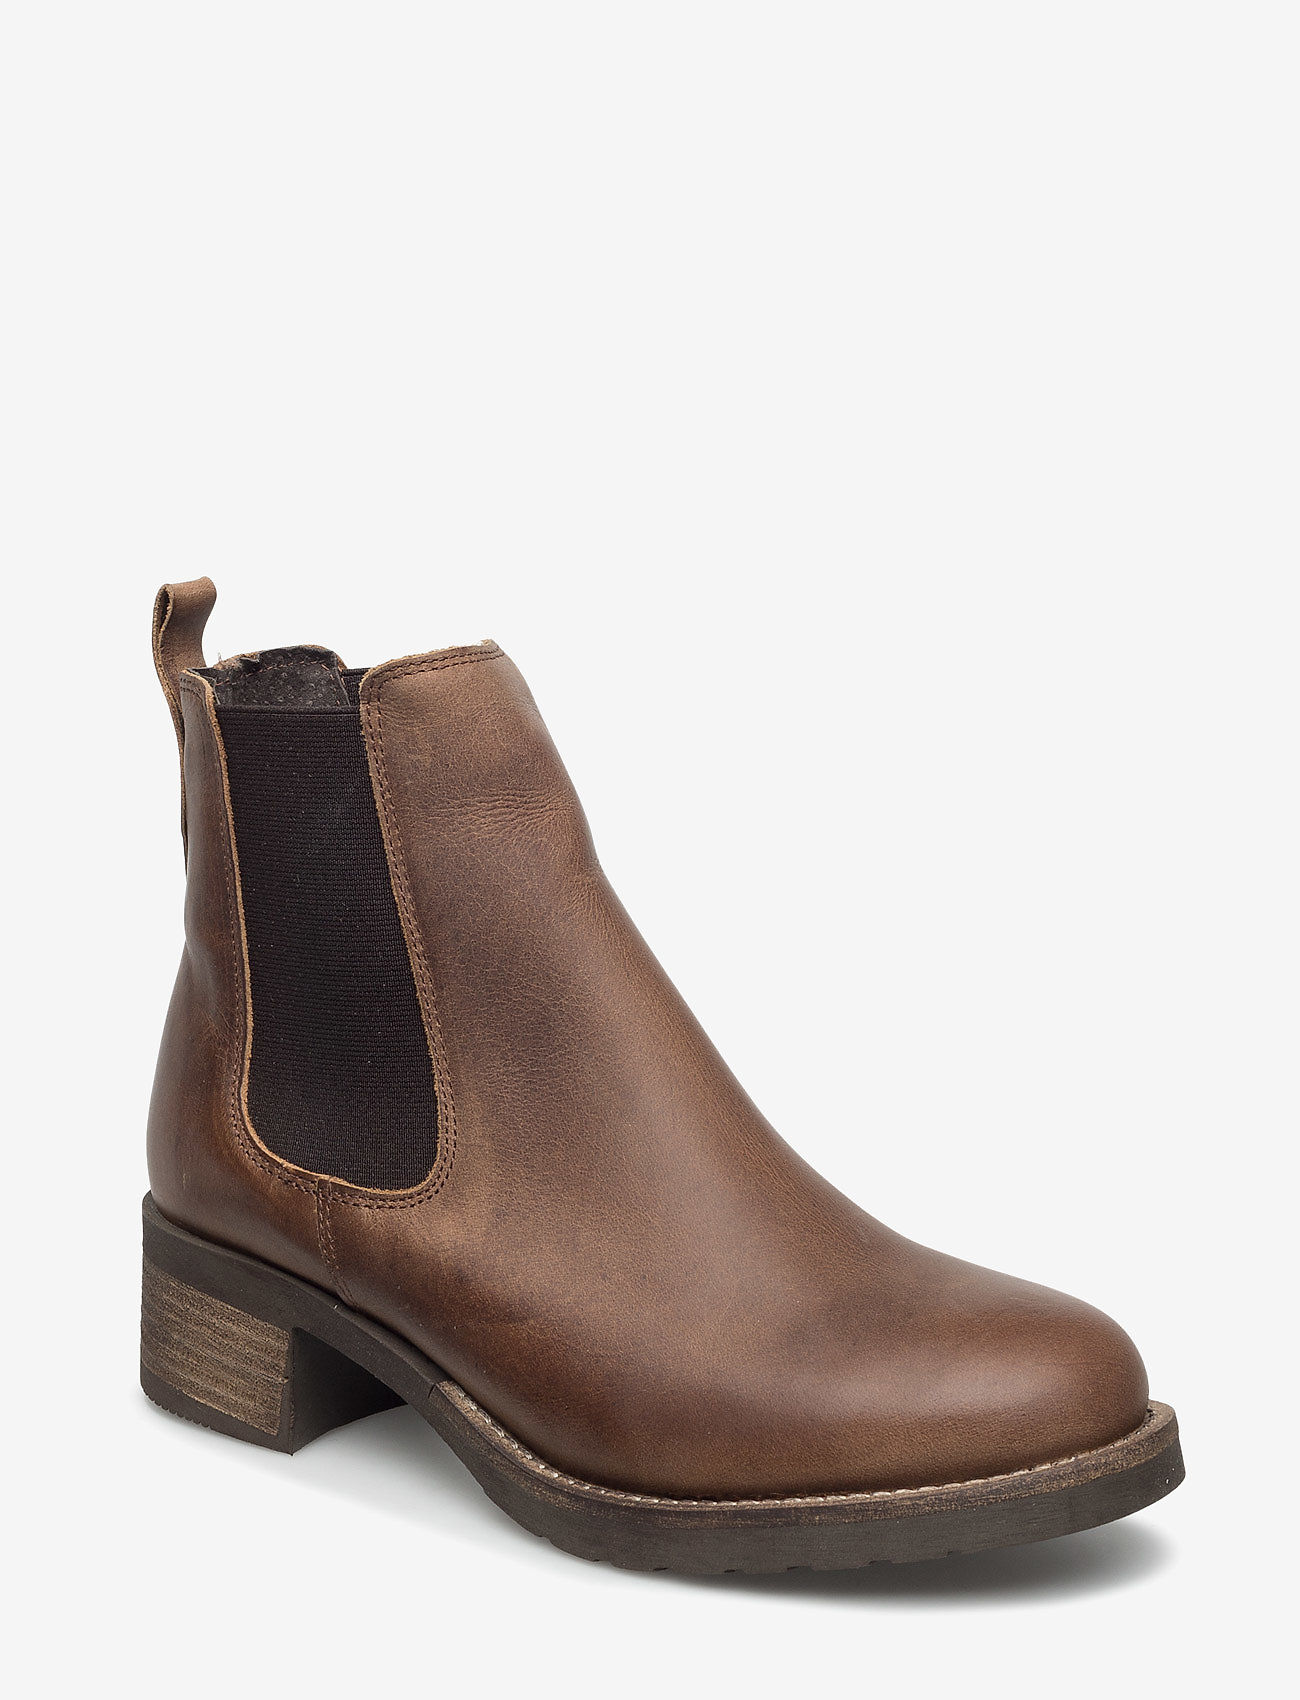 wool lined chelsea boots